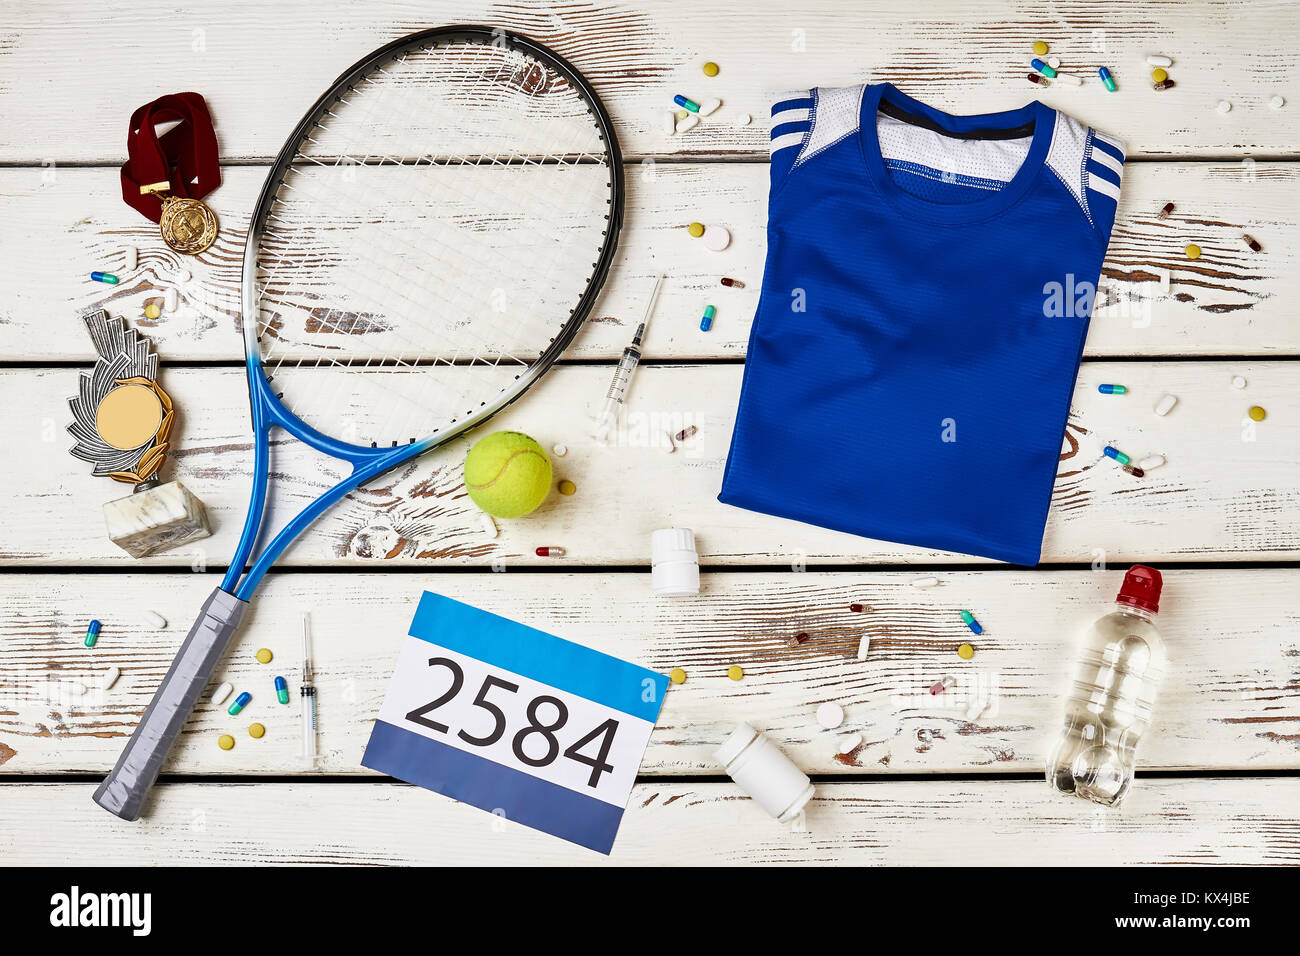 Tennis equipment, drugs and awards Stock Photo